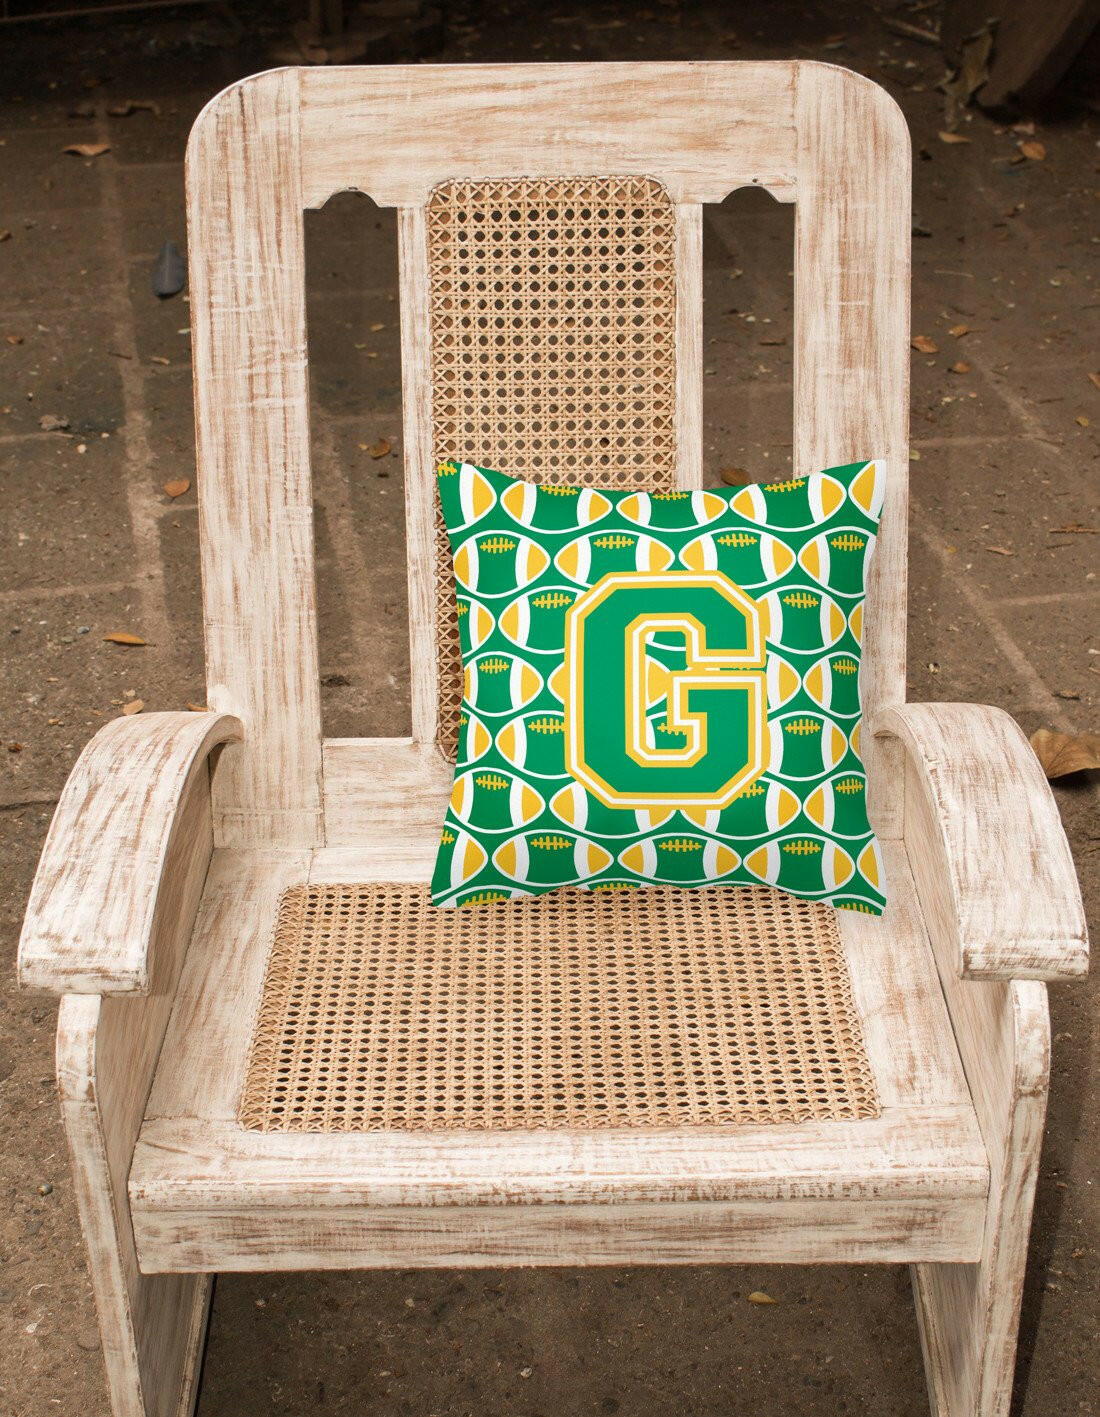 Letter G Football Green and Gold Fabric Decorative Pillow CJ1069-GPW1414 by Caroline's Treasures